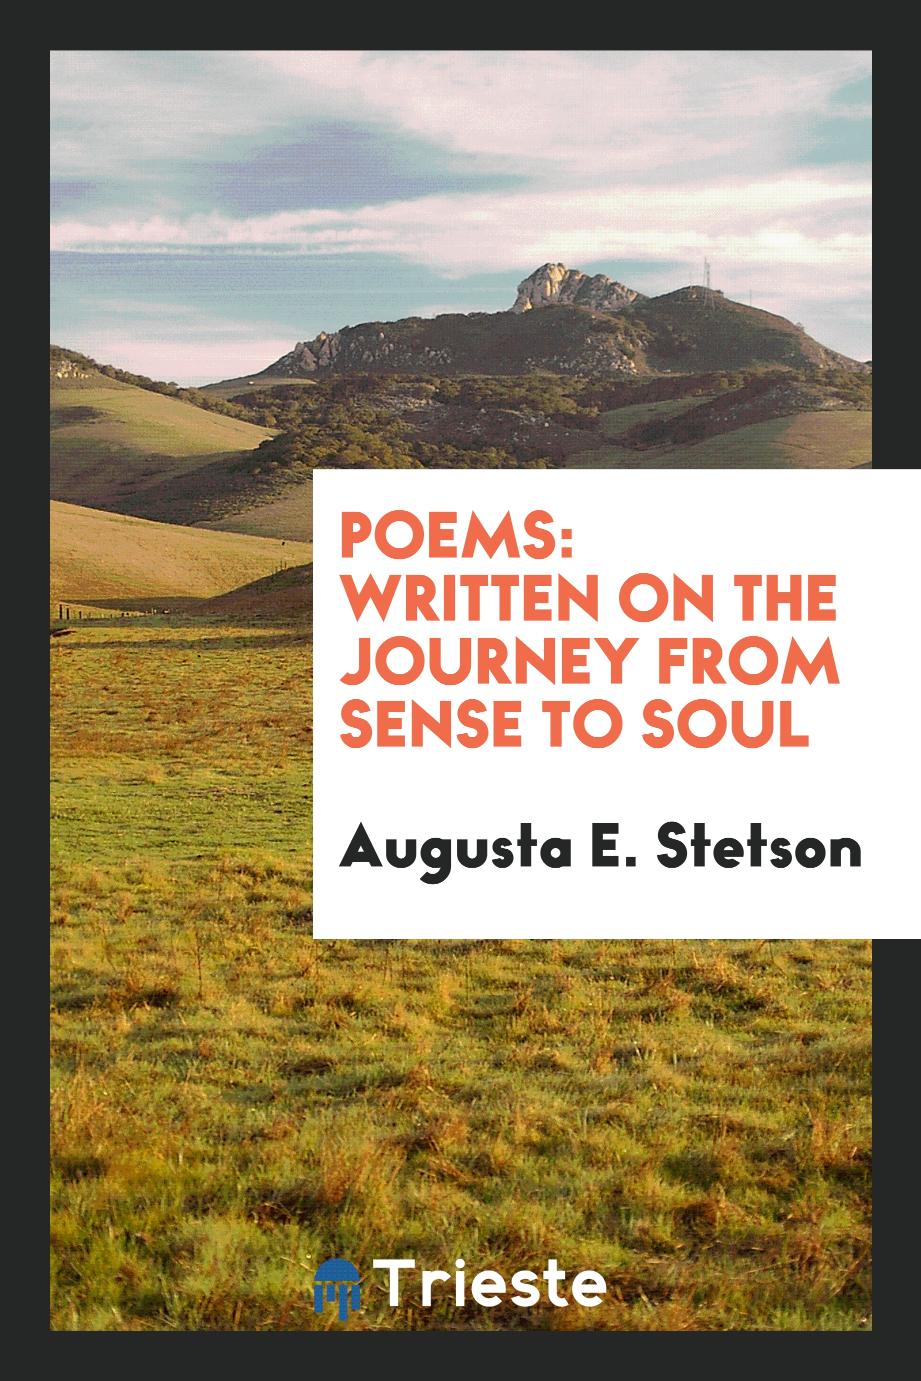 Poems: Written on the Journey from Sense to Soul